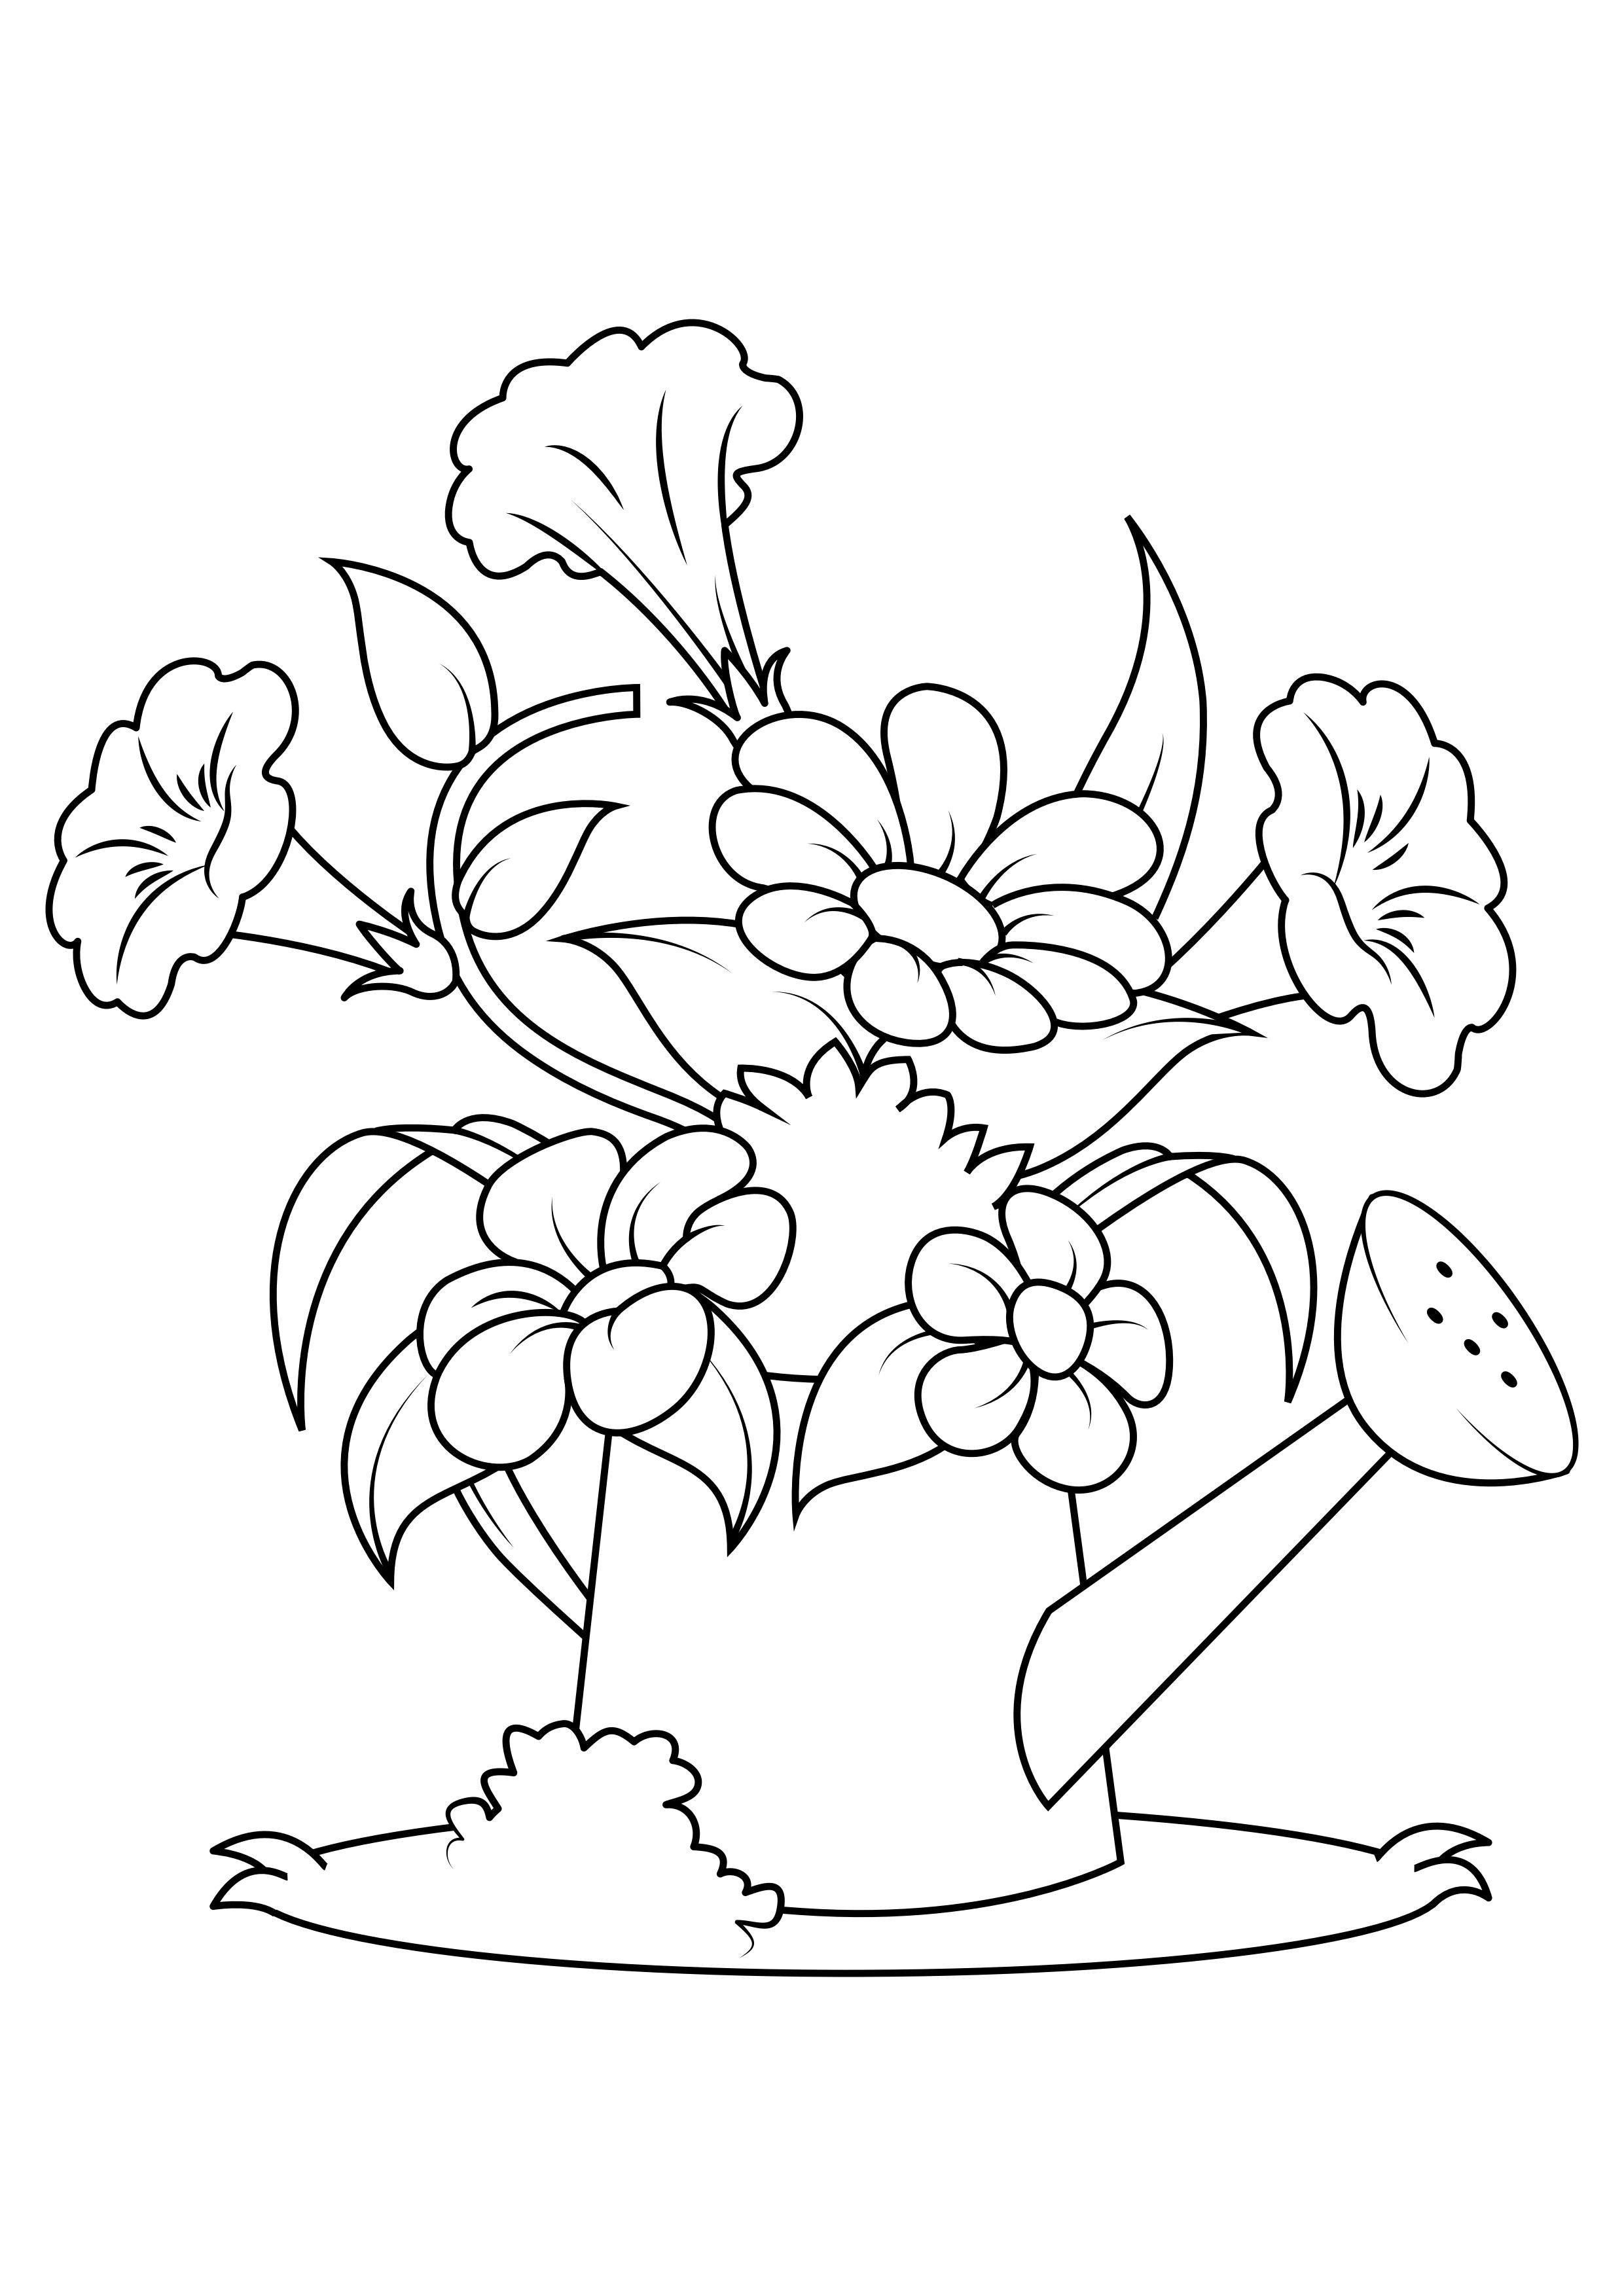 Coloring page flowers in watering can